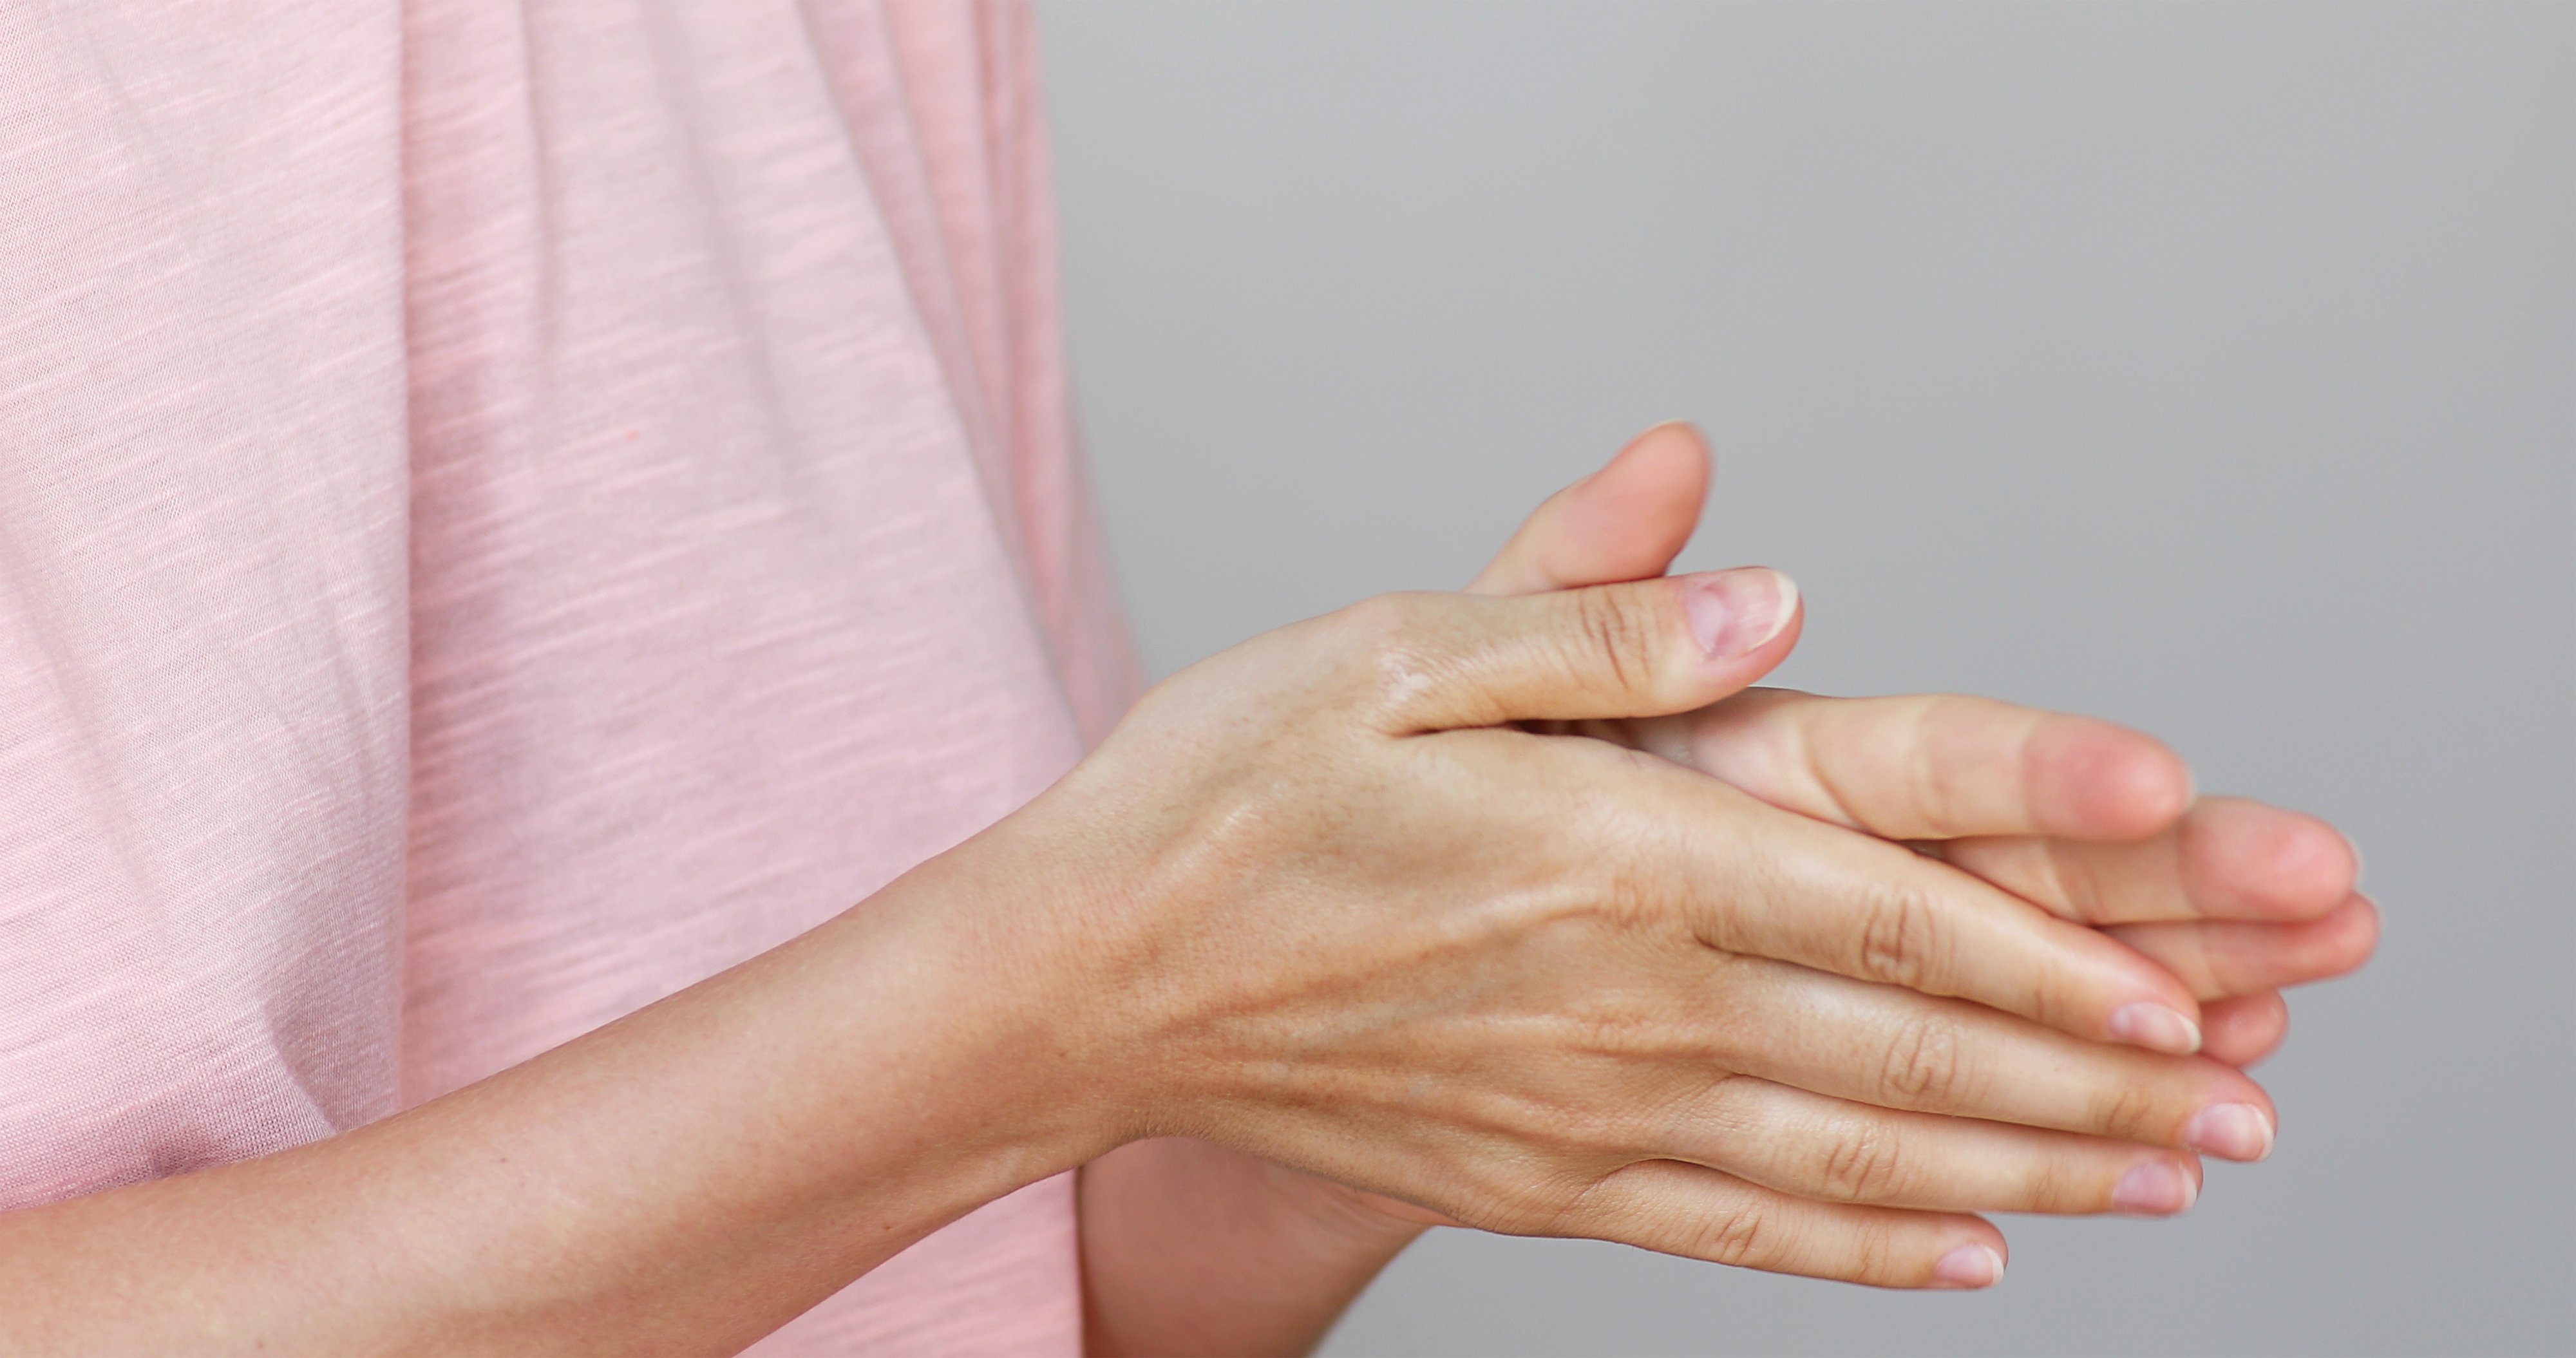 A woman rubbing her hands together | Photo: Shutterstock